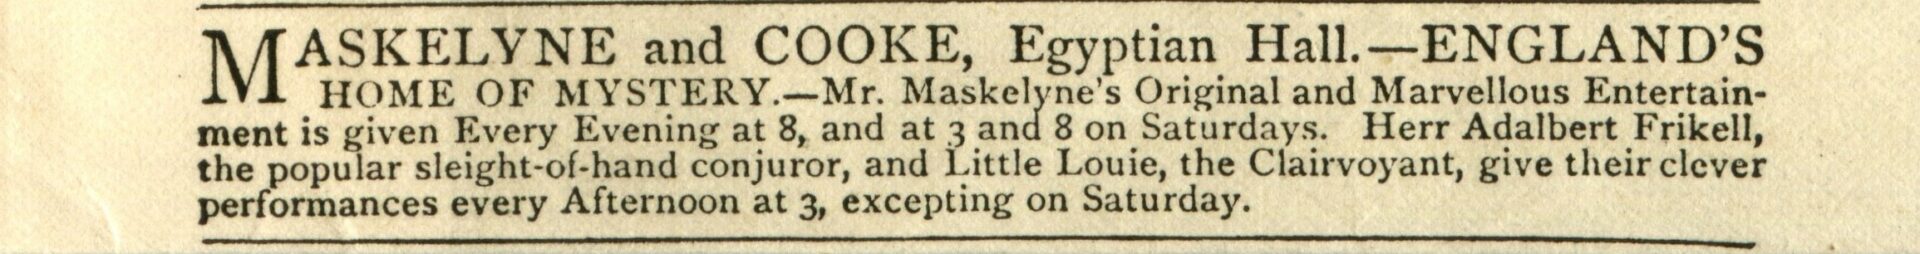 Advertisement for Maskelyne and Cooke and Adalbert Frikell at the Egyptian Hall, 1880